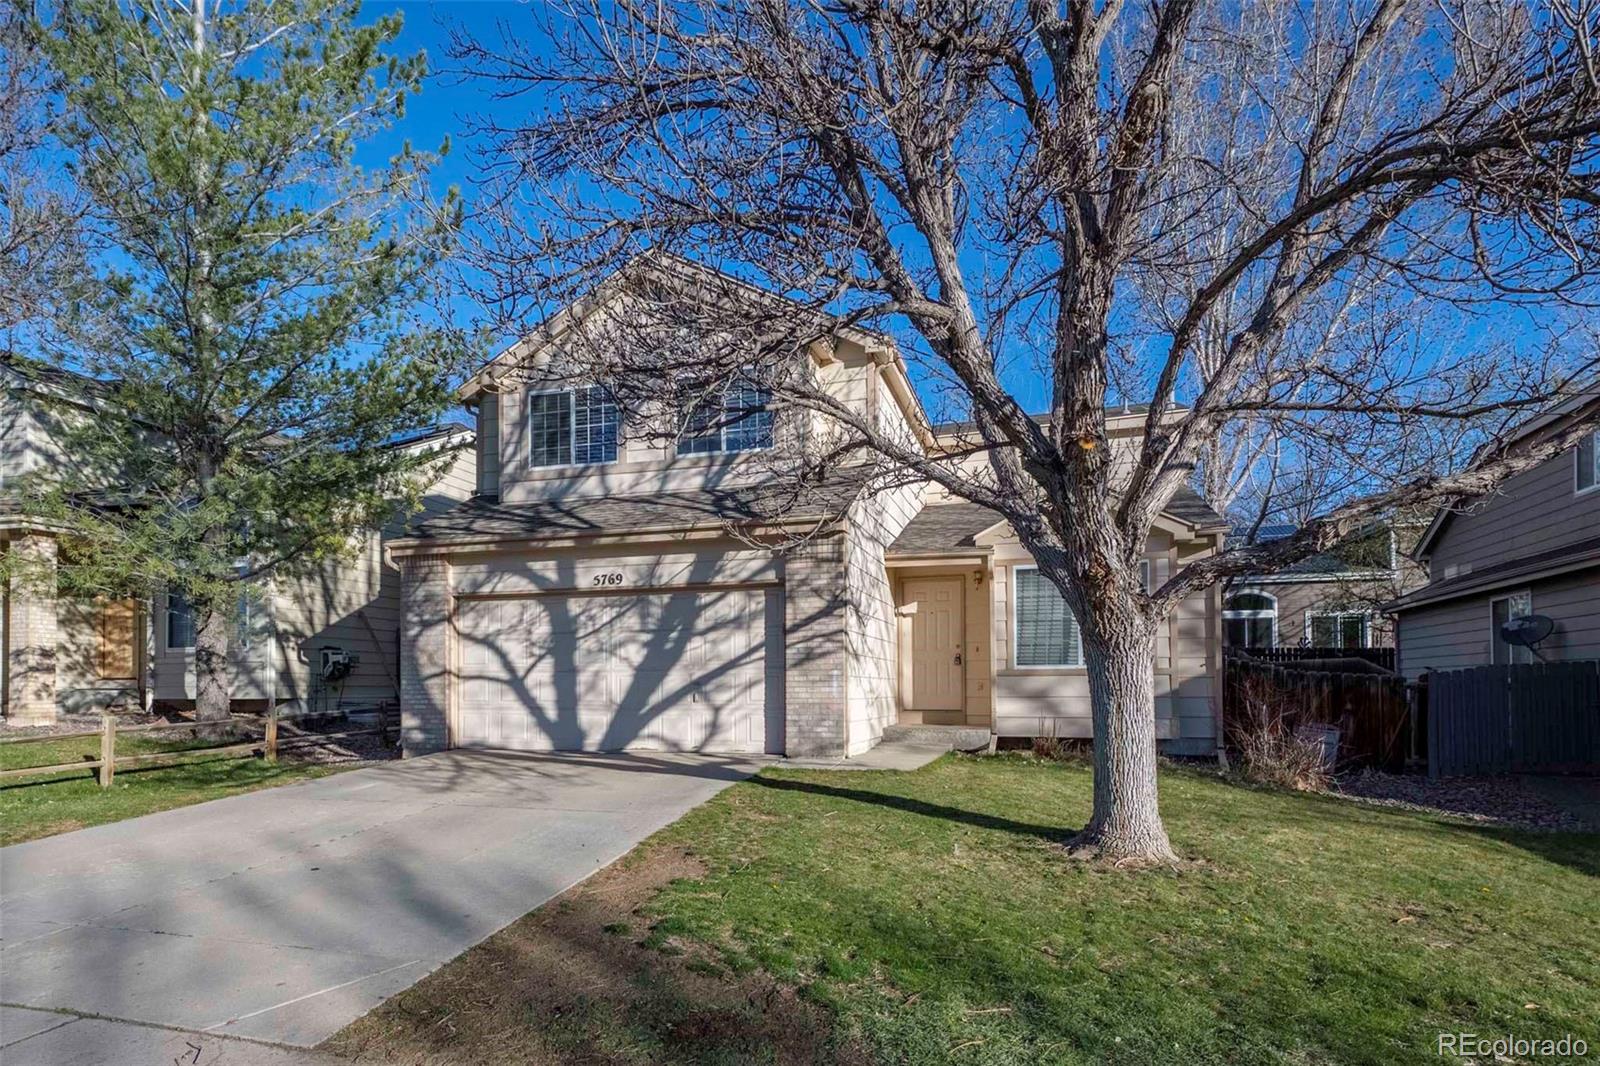 Report Image for 5769 W 116th Place,Westminster, Colorado